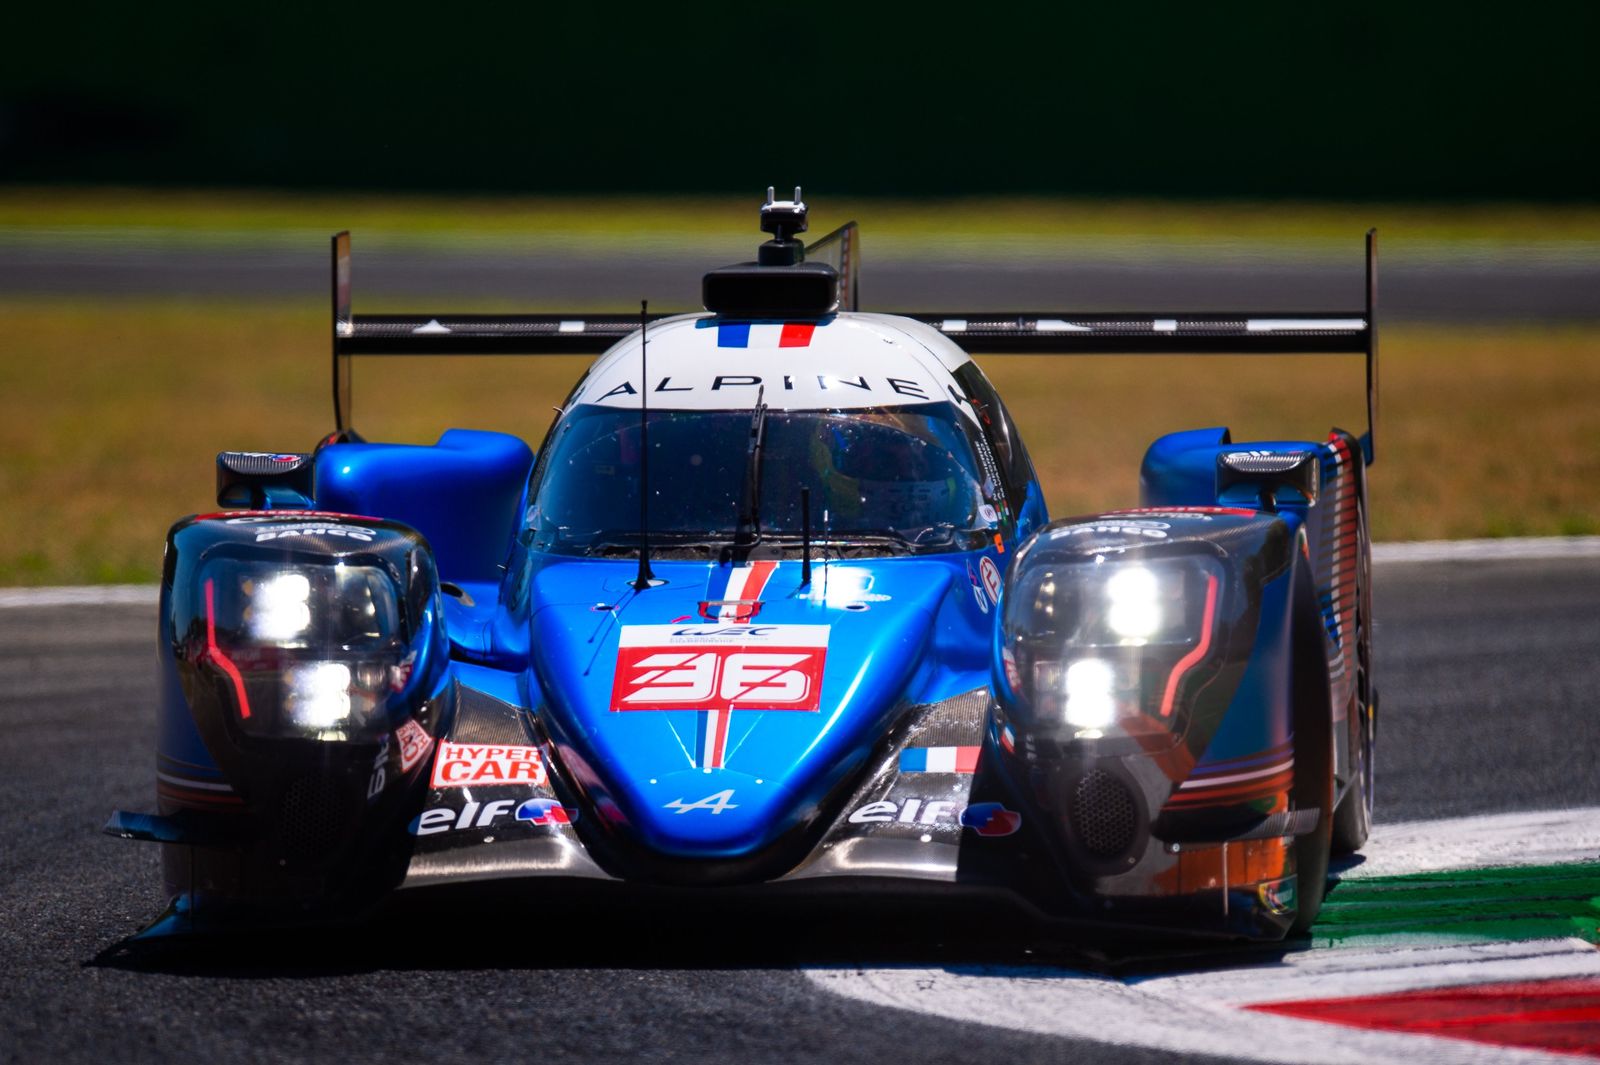 Alpine Takes Second WEC Win in Italy